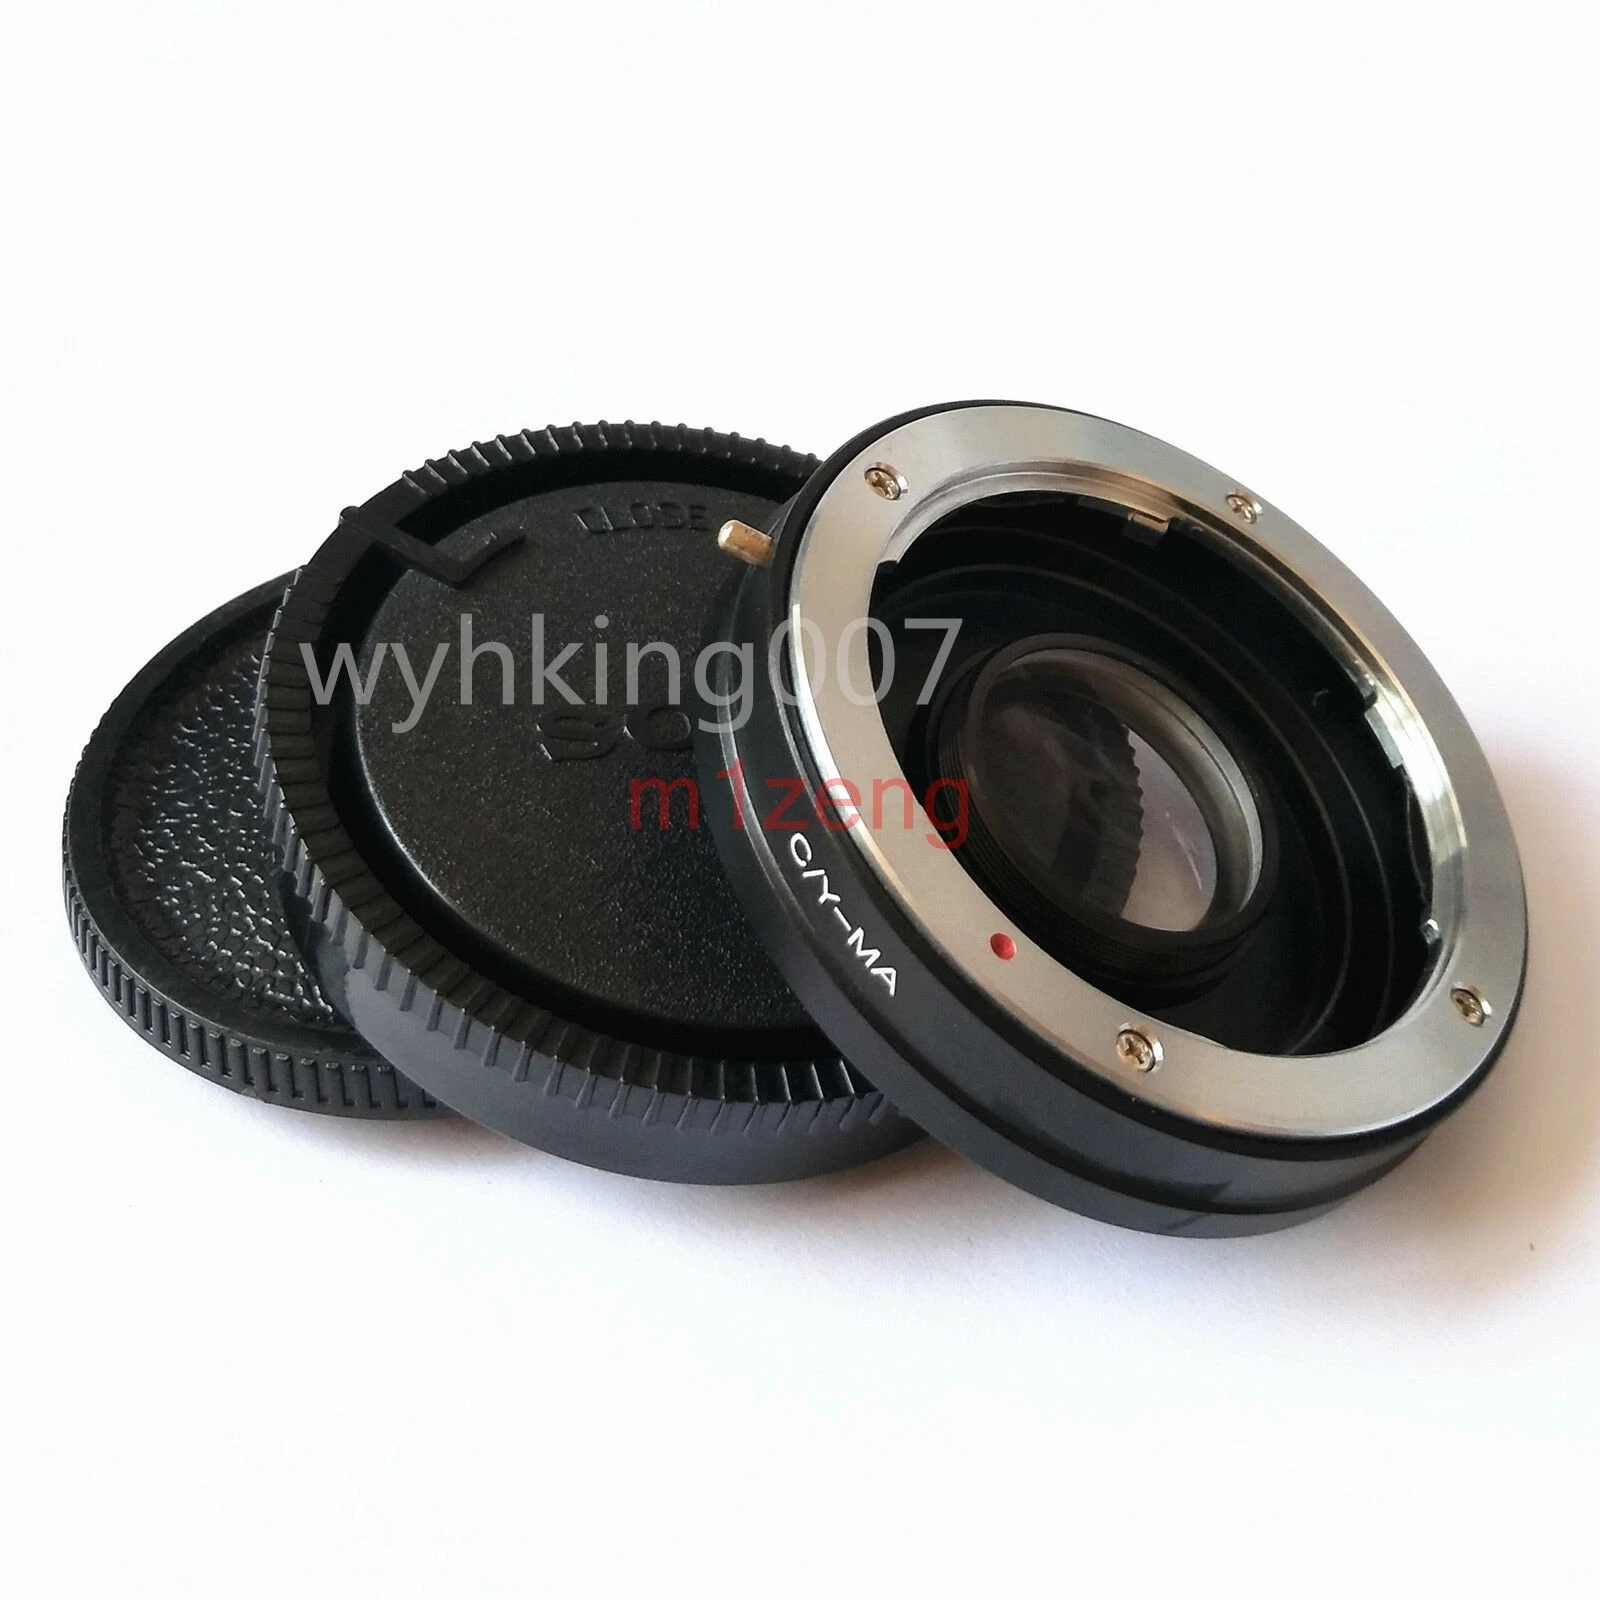 

adapter Infinity Focus with glass for Contax Yashica CY Lens to Sony Alpha Minolta AF MA DSLR camera